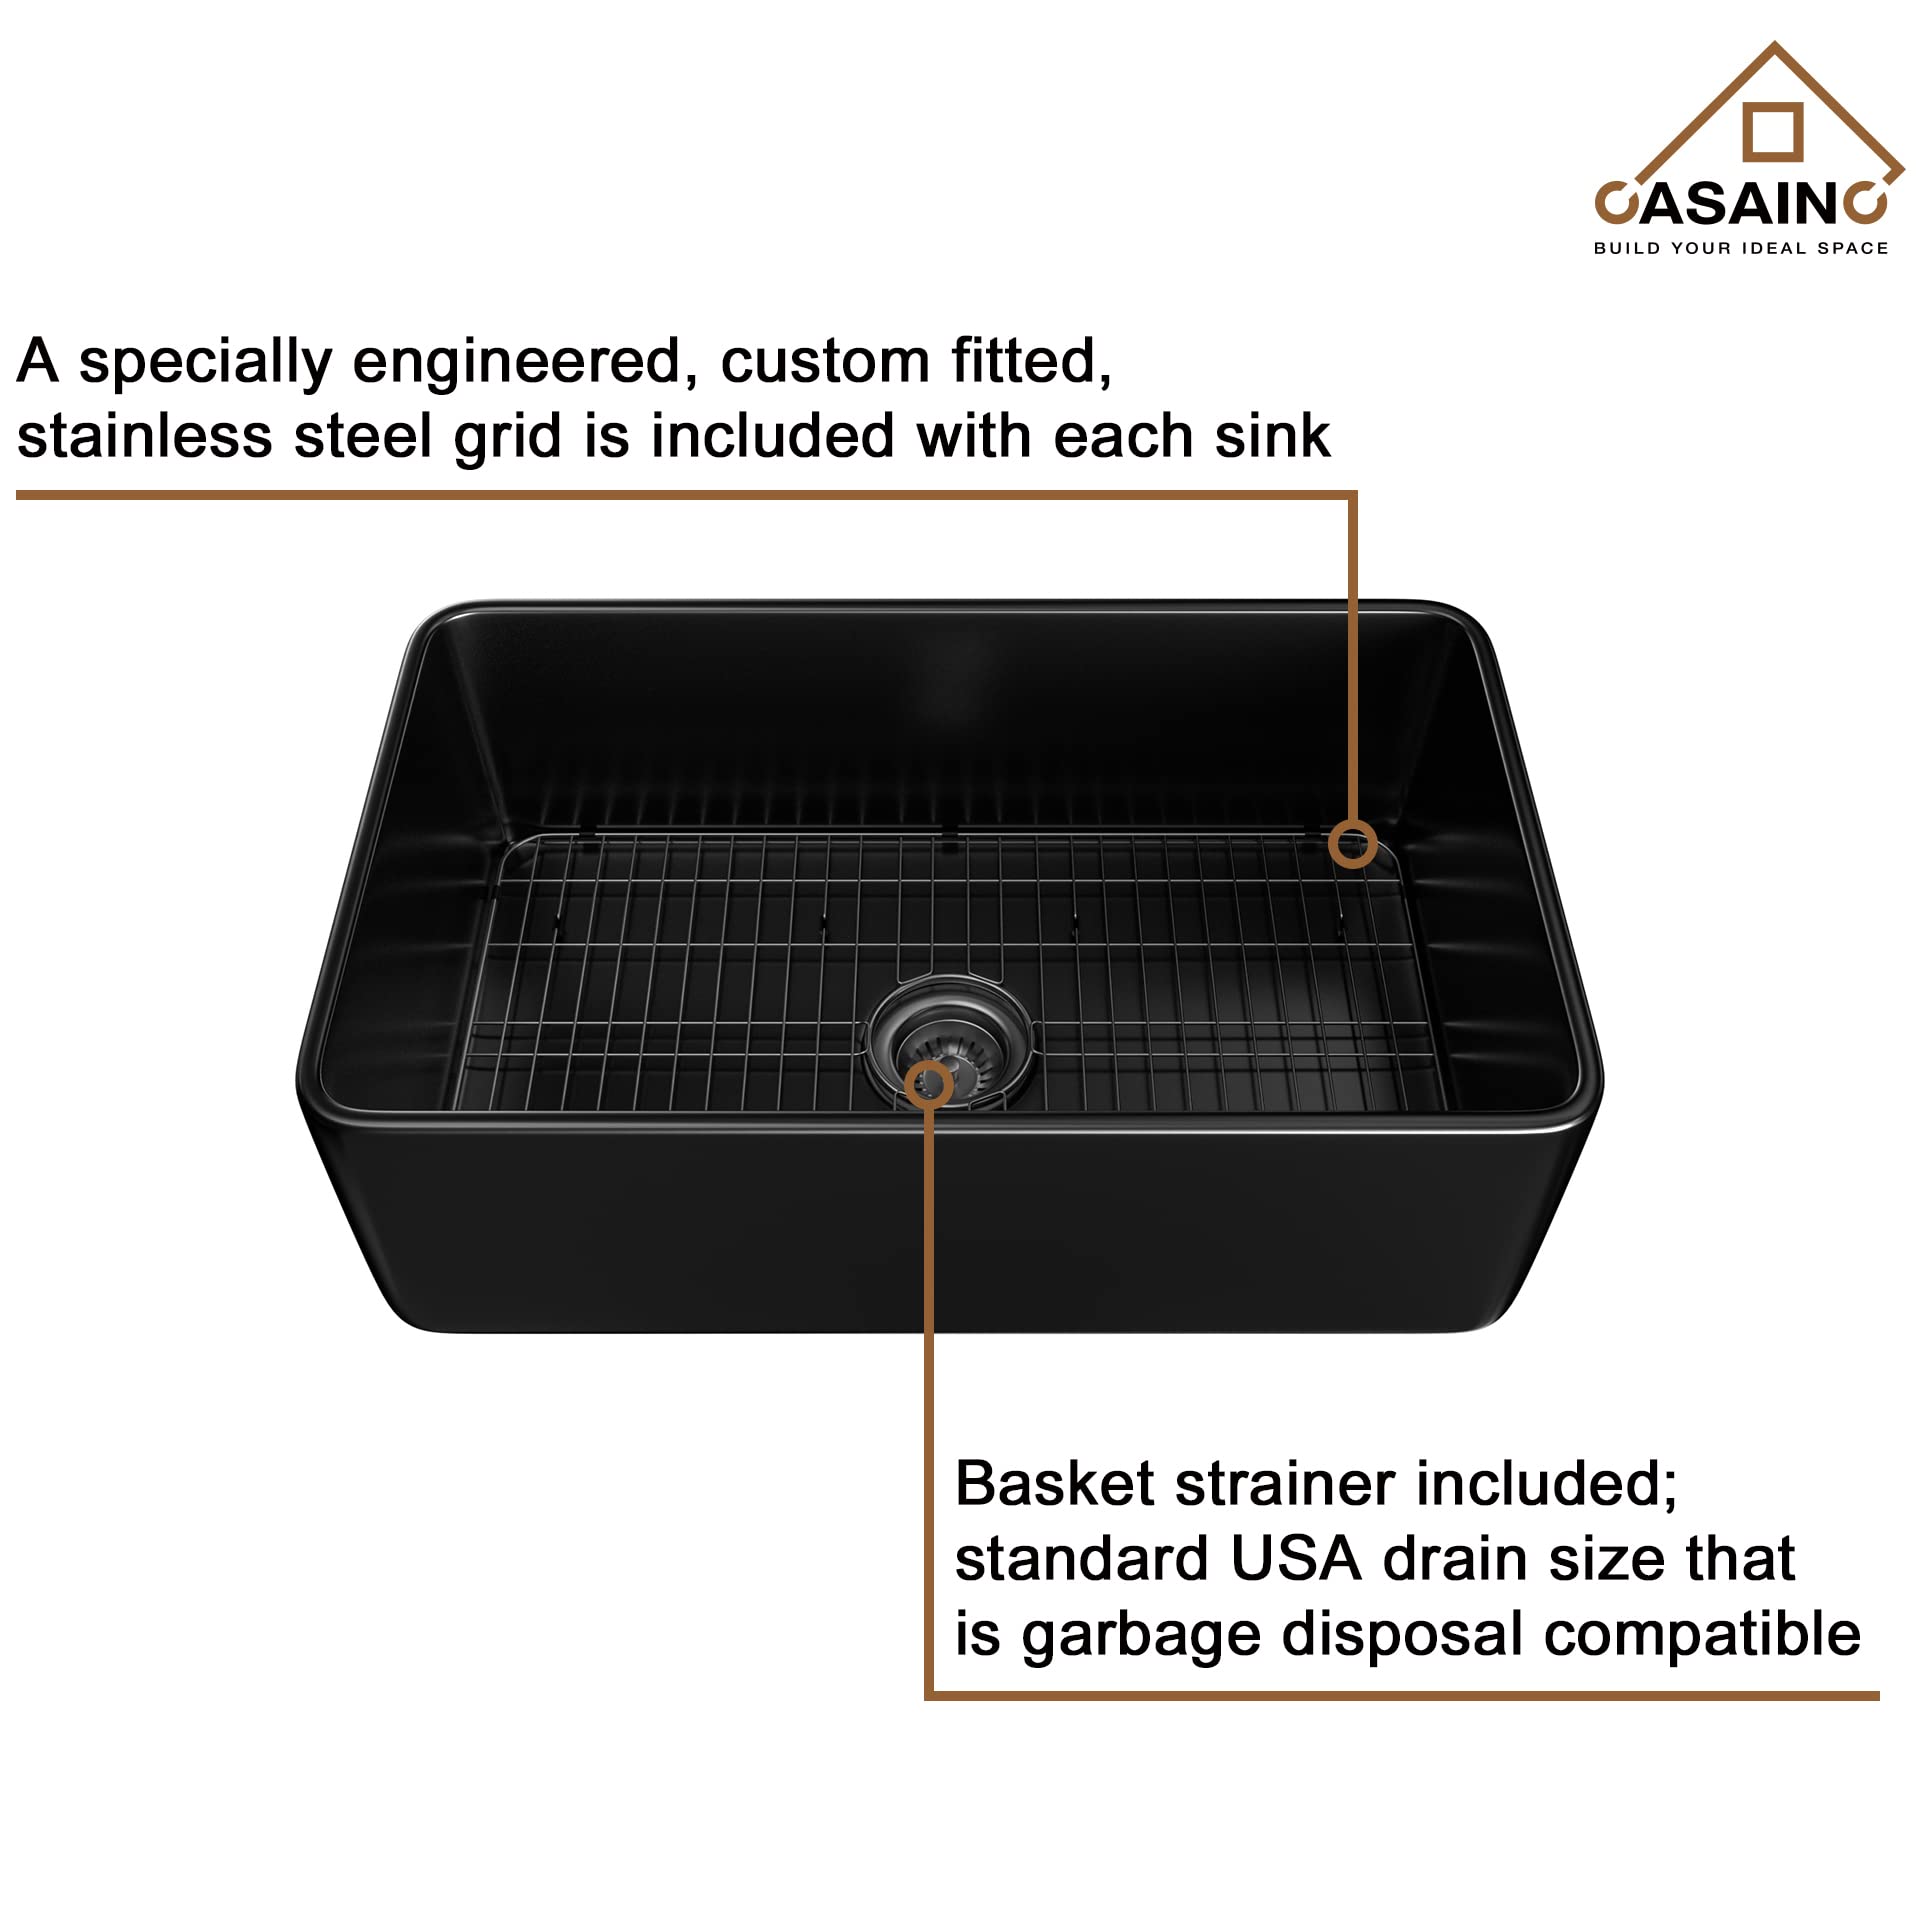 CASAINC 30-inch Kitchen Sink Black, Farmhouse Sink Fireclay Apron -Front Farmhouse Deep Single Bowl, Farmhouse Sink with Stainless Steel Bottom Grid and Kitchen Sink Drain